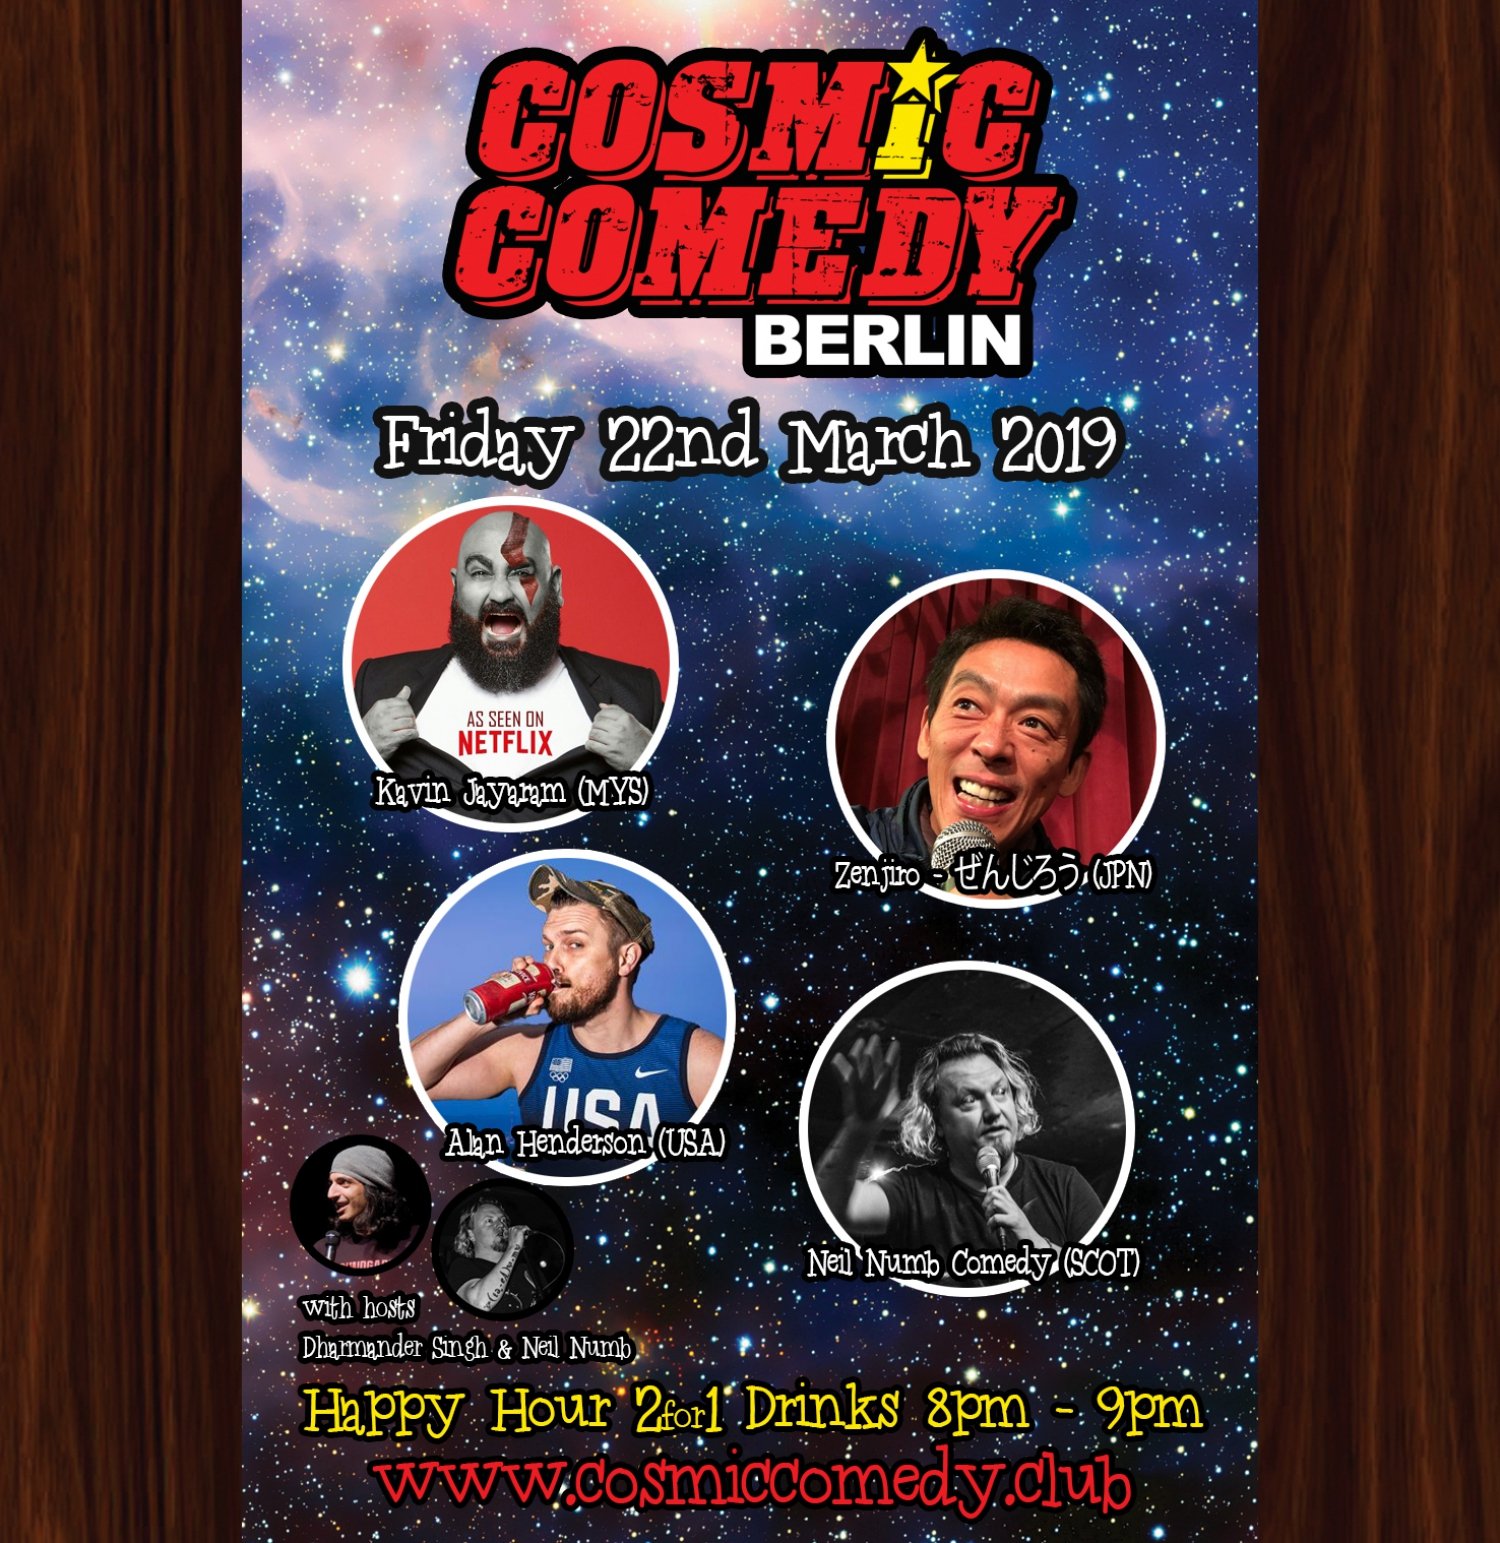 Cosmic Comedy Club with Free pizza & shots